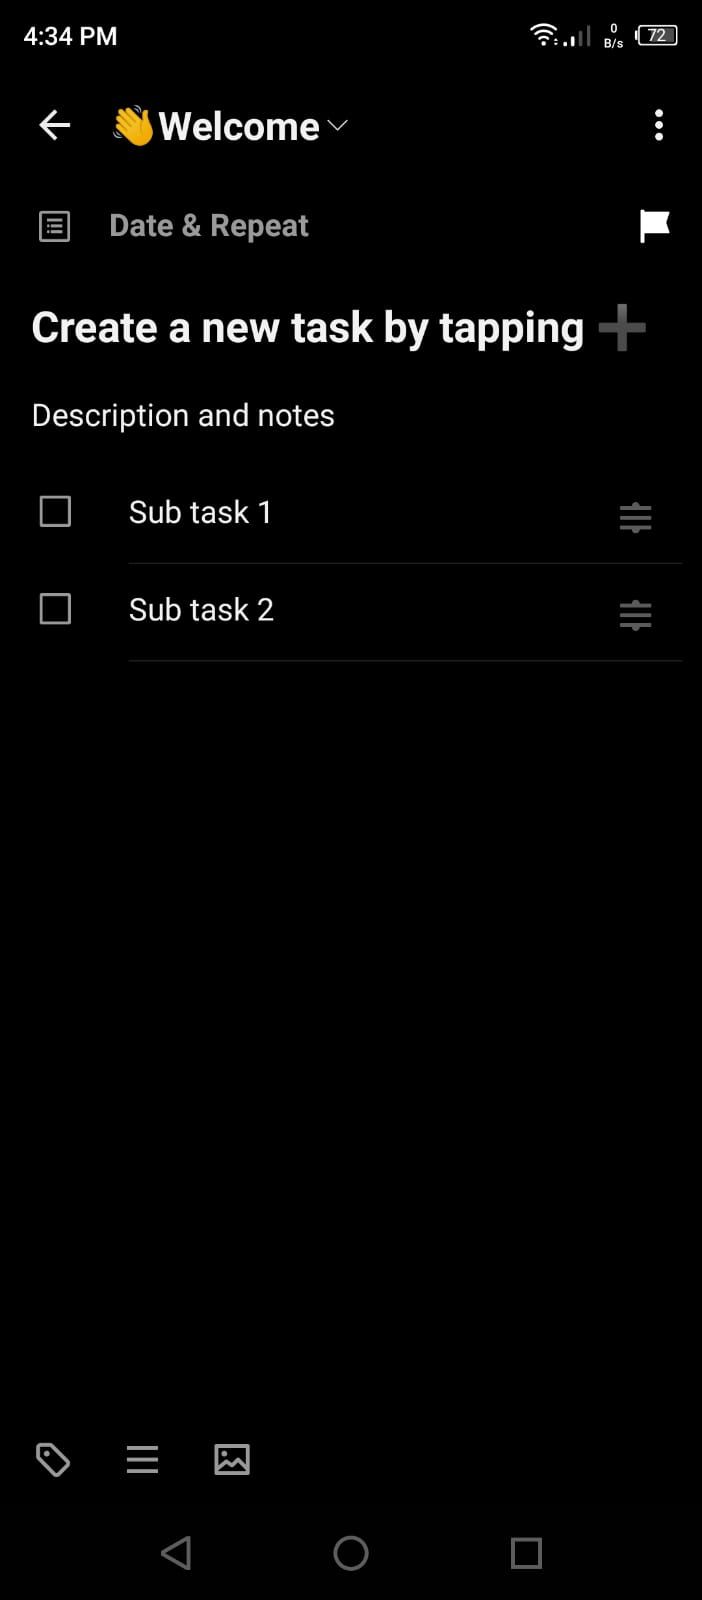 TickTick - Notes and Sub Tasks